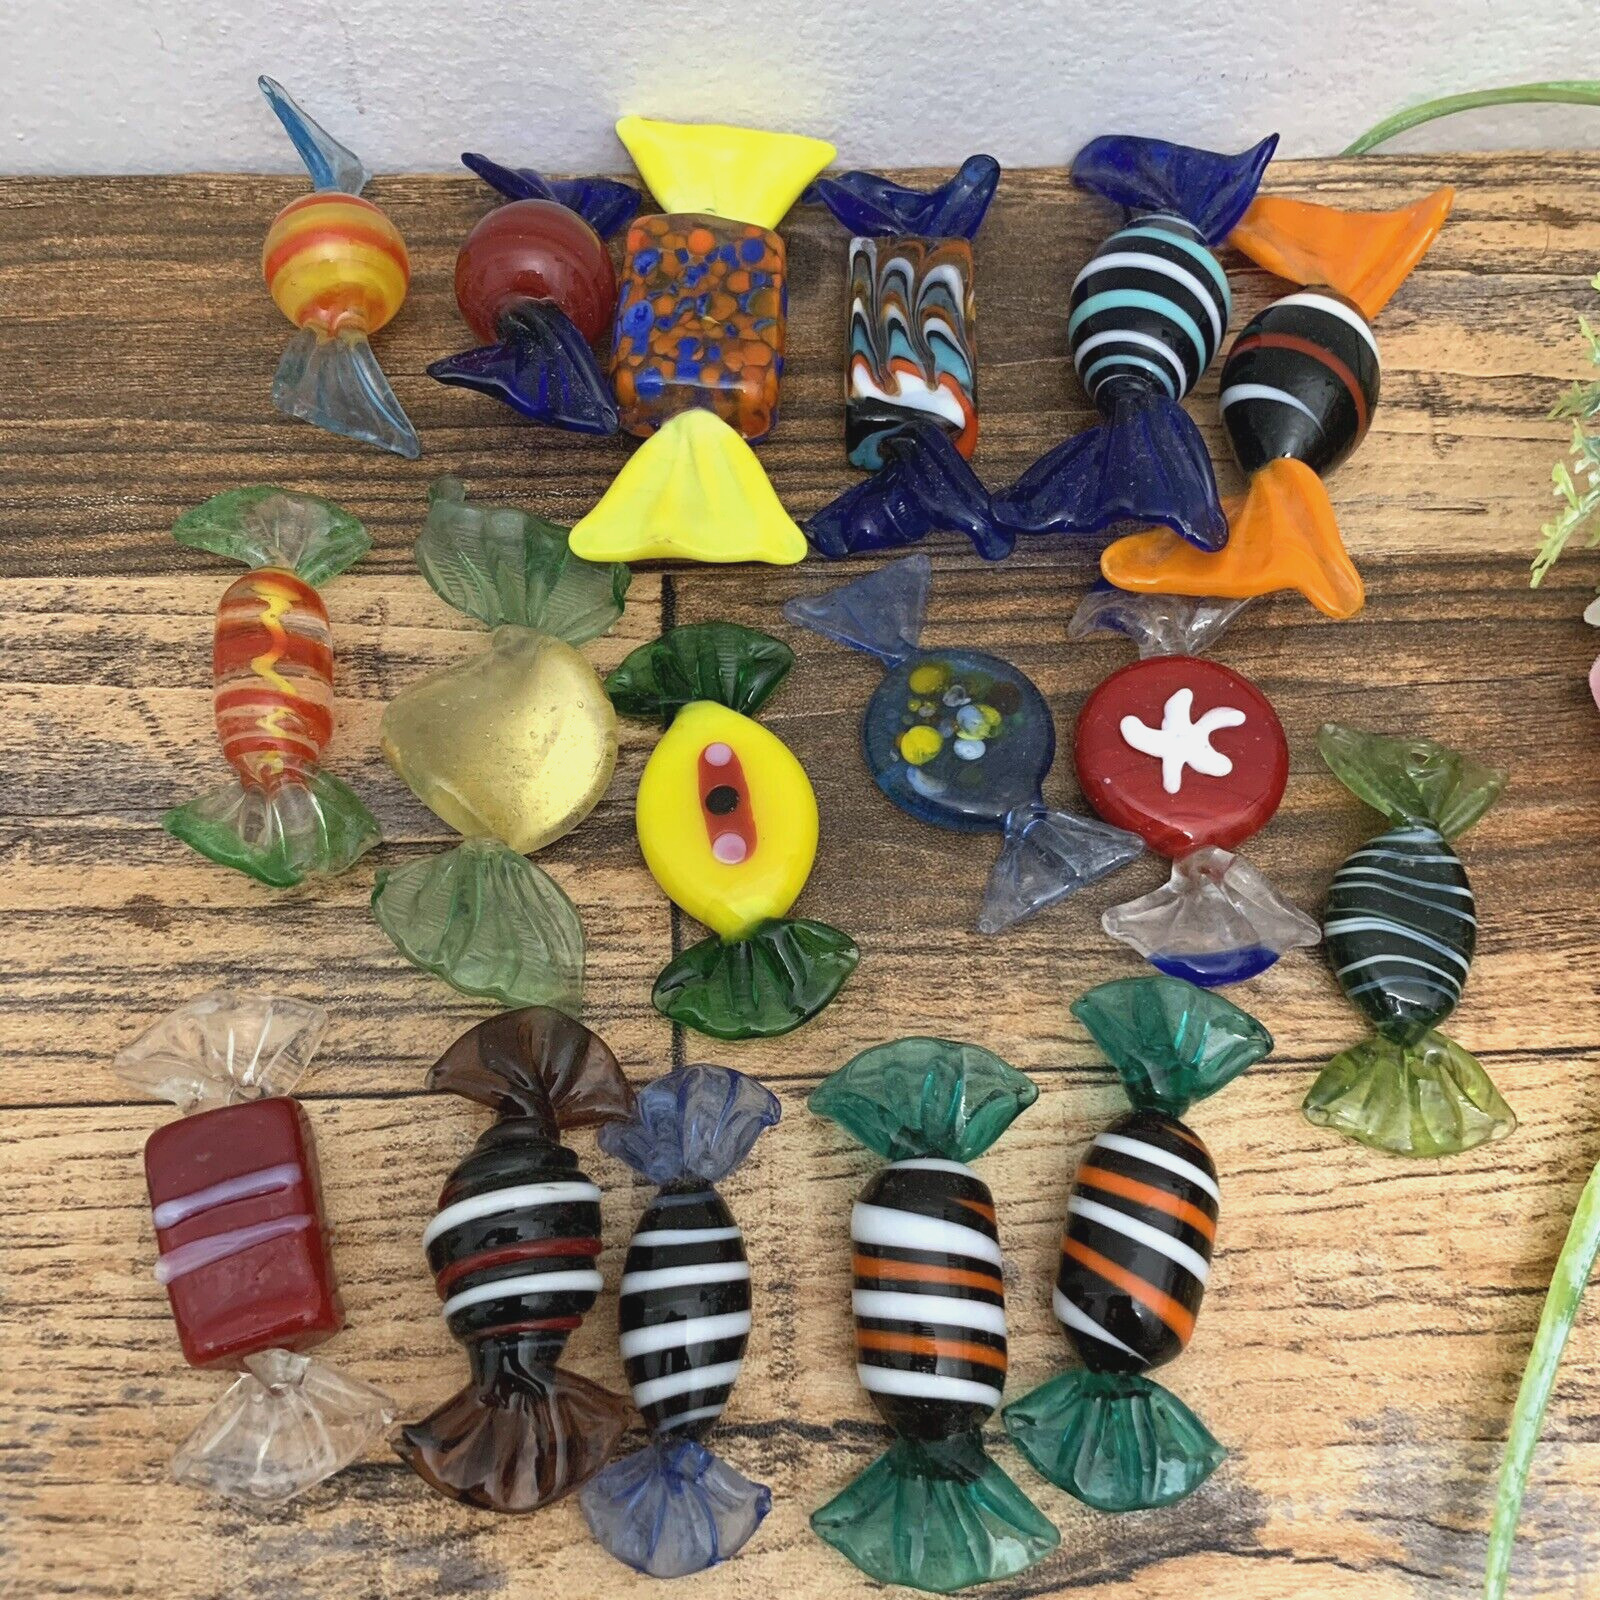 Murano - Vintage Glass Candy - Lot of 17 Pieces